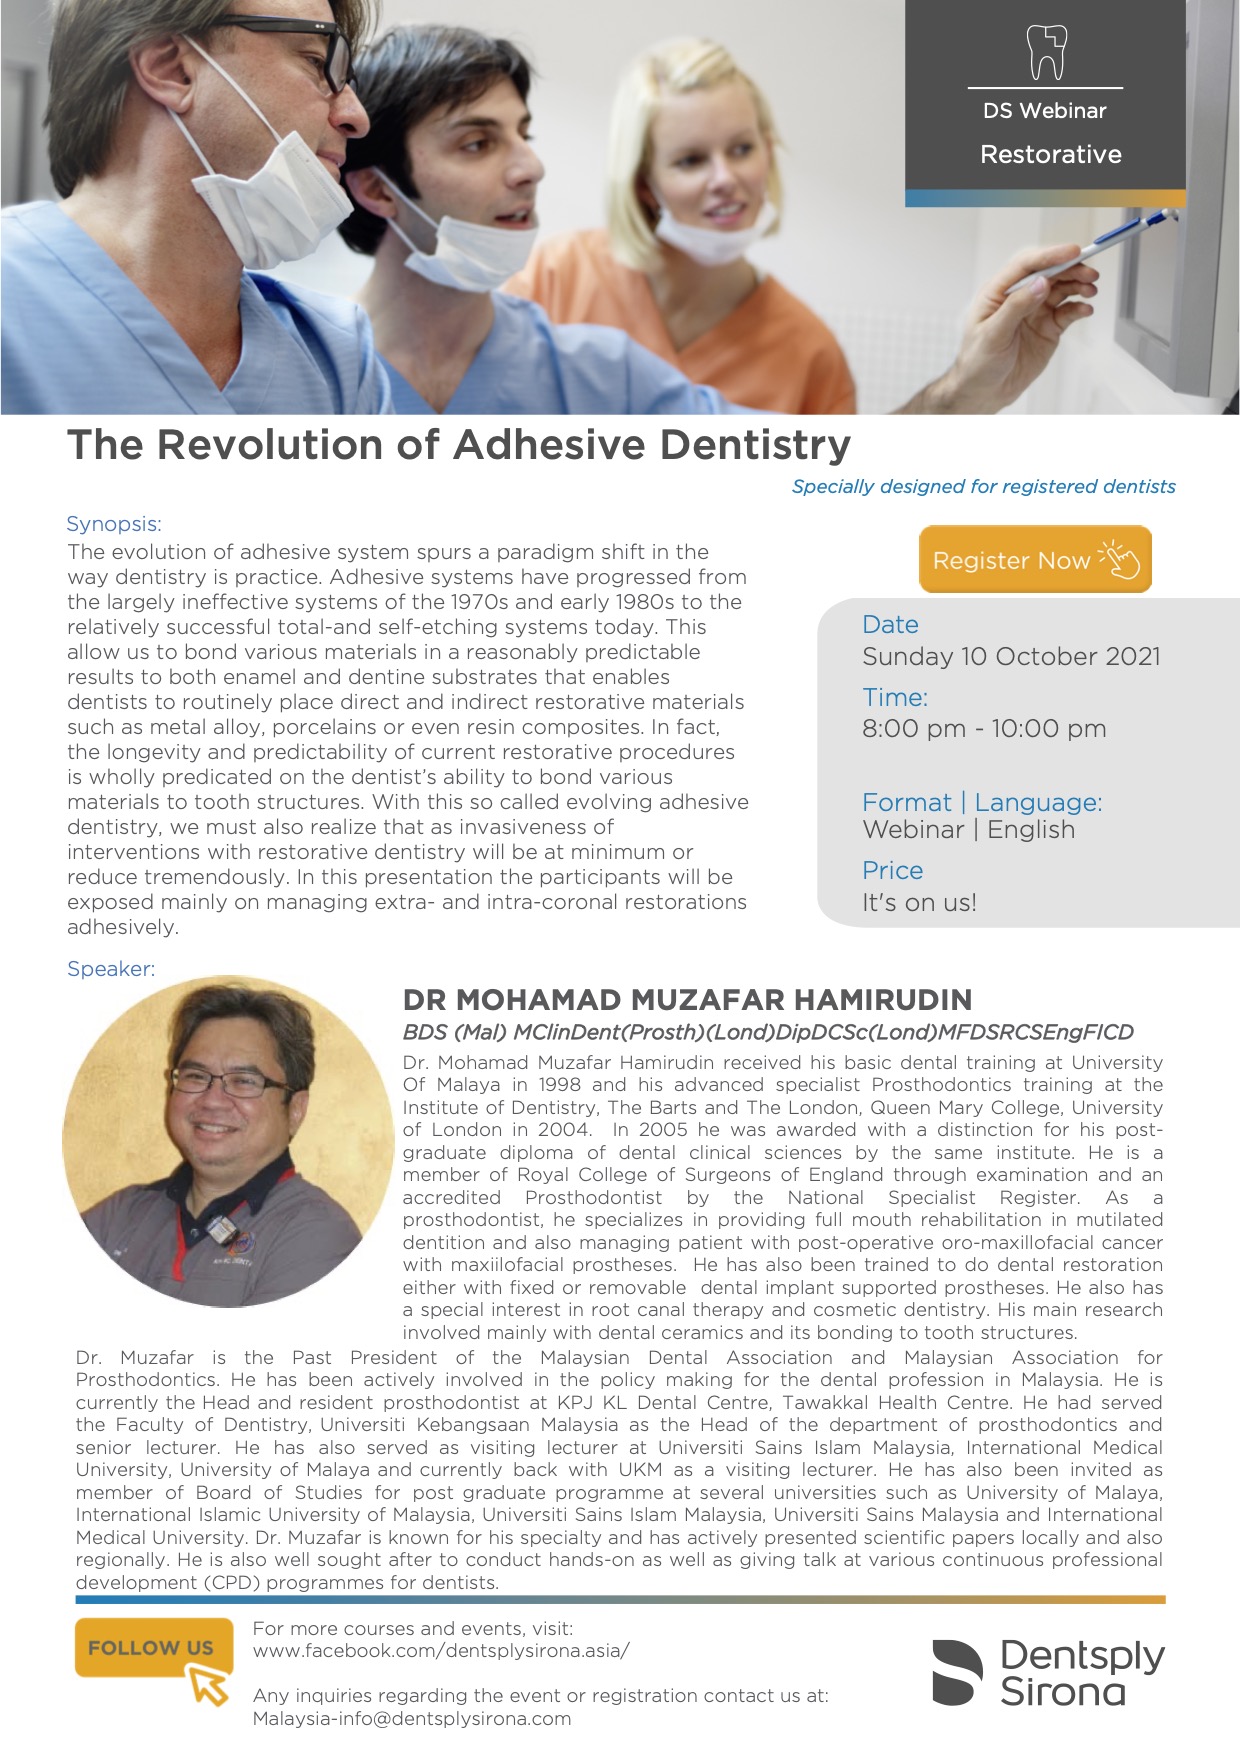 The Revolution of Adhesive Dentistry Flyer